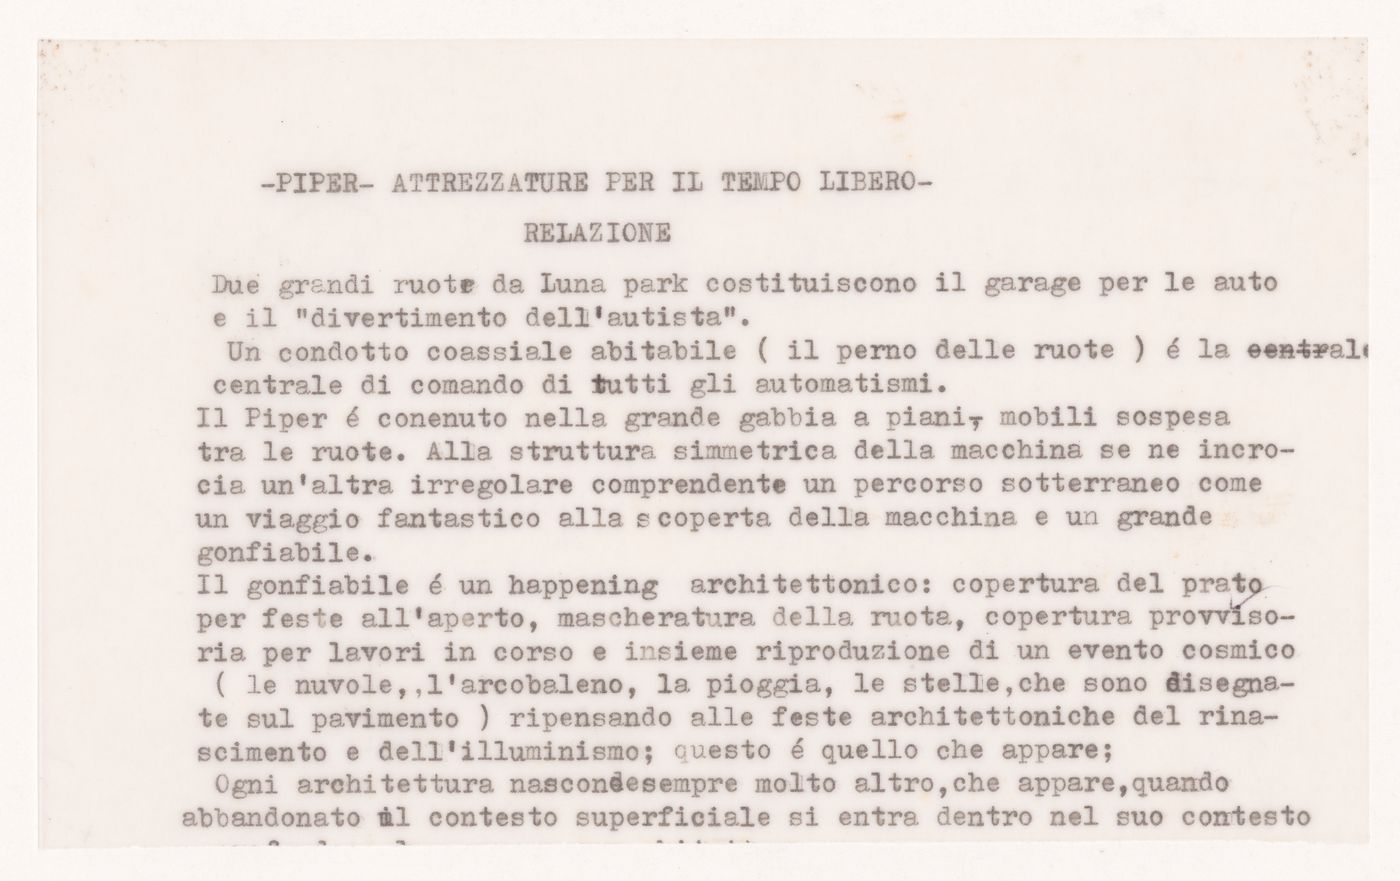 Fragment of a textual document for Architettura Interplanetaria [Interplanetary Architecture]